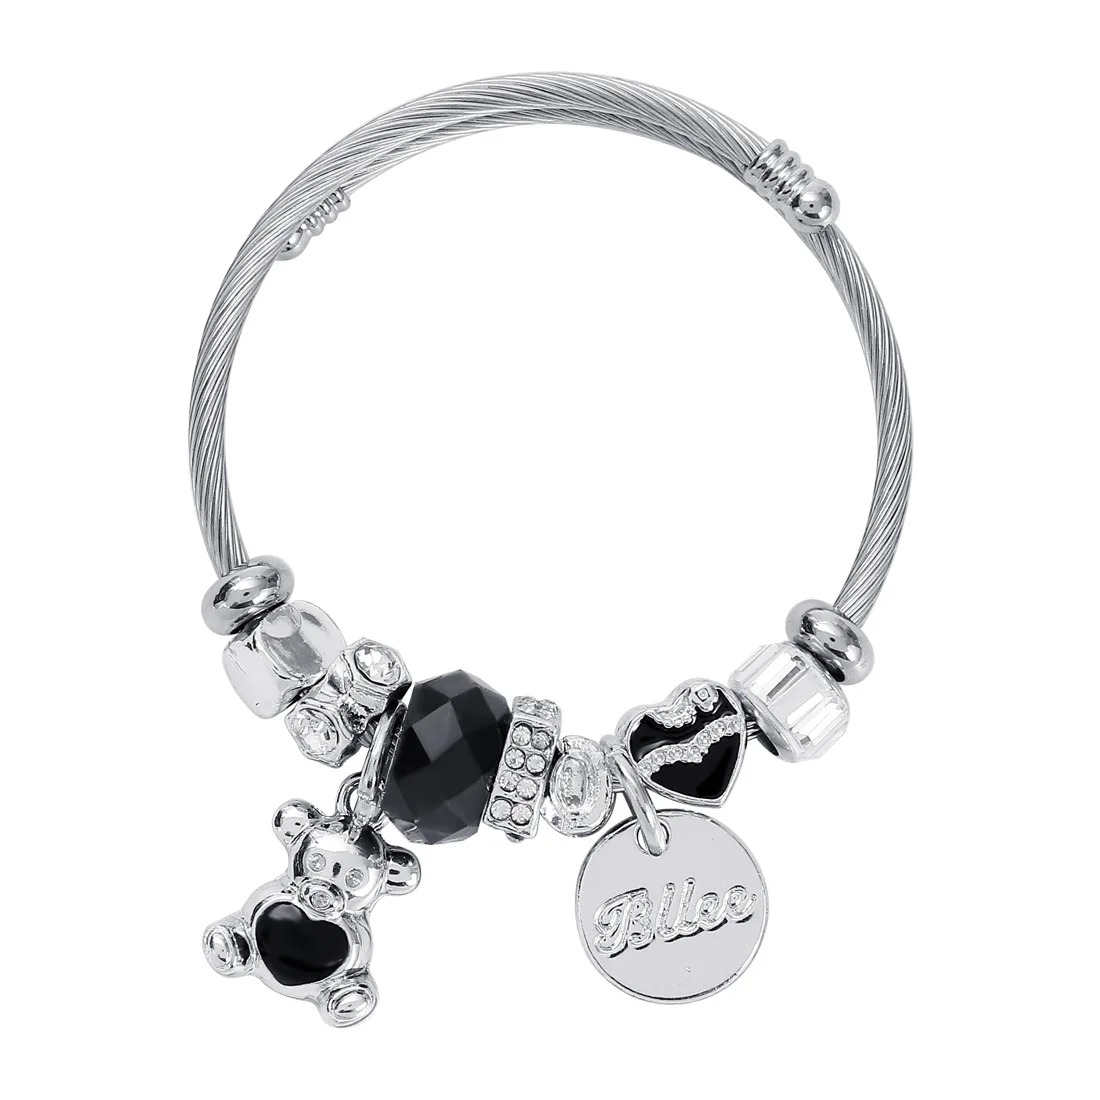 Romantic Bear Charm Bracelet With Client's Own Logo Engraved Stainless Steel Jewelry Hot Selling Lady Fashion Cuff Bracelet